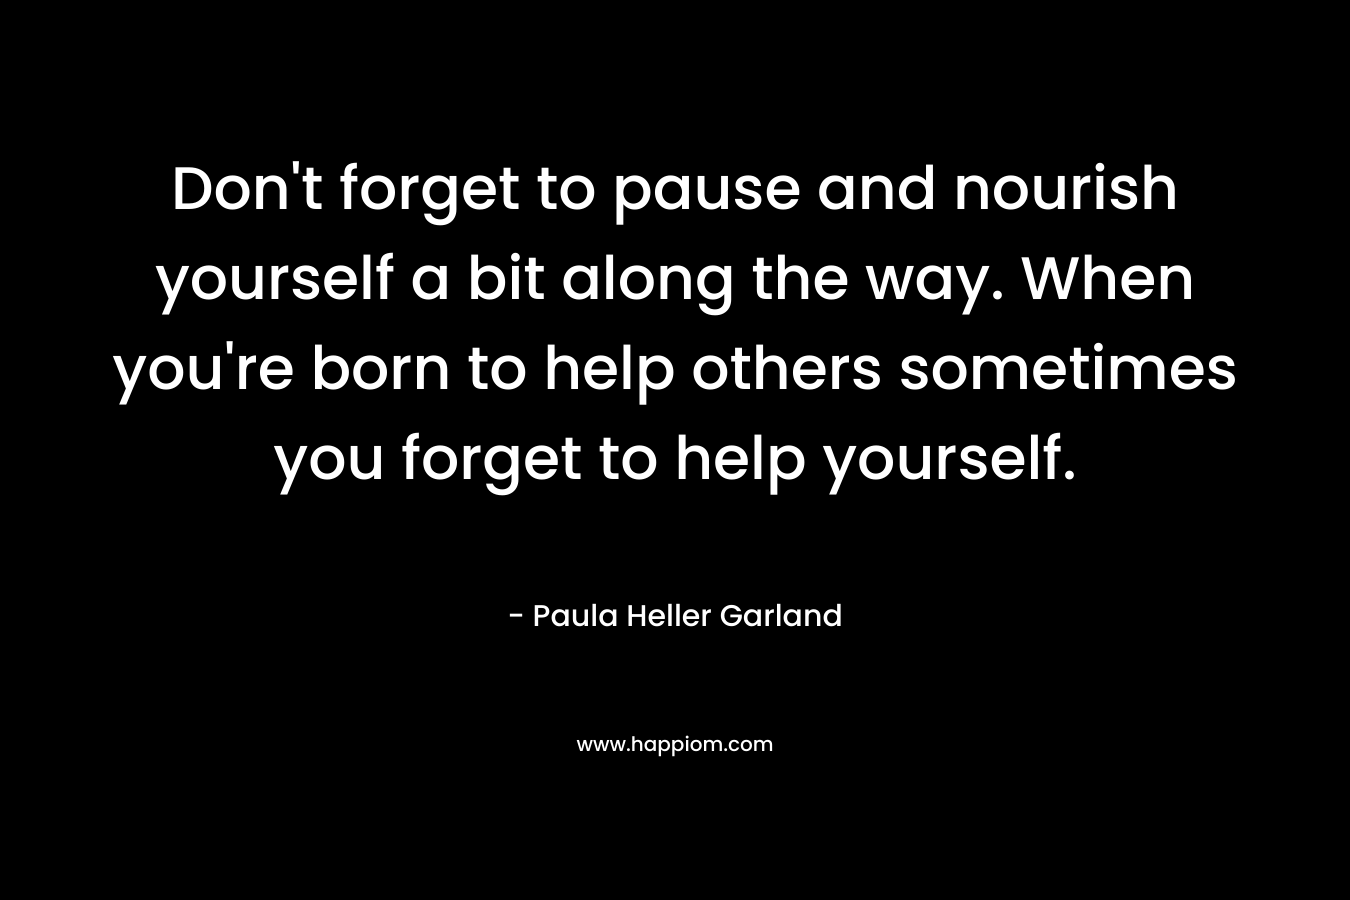 Don't forget to pause and nourish yourself a bit along the way. When you're born to help others sometimes you forget to help yourself.